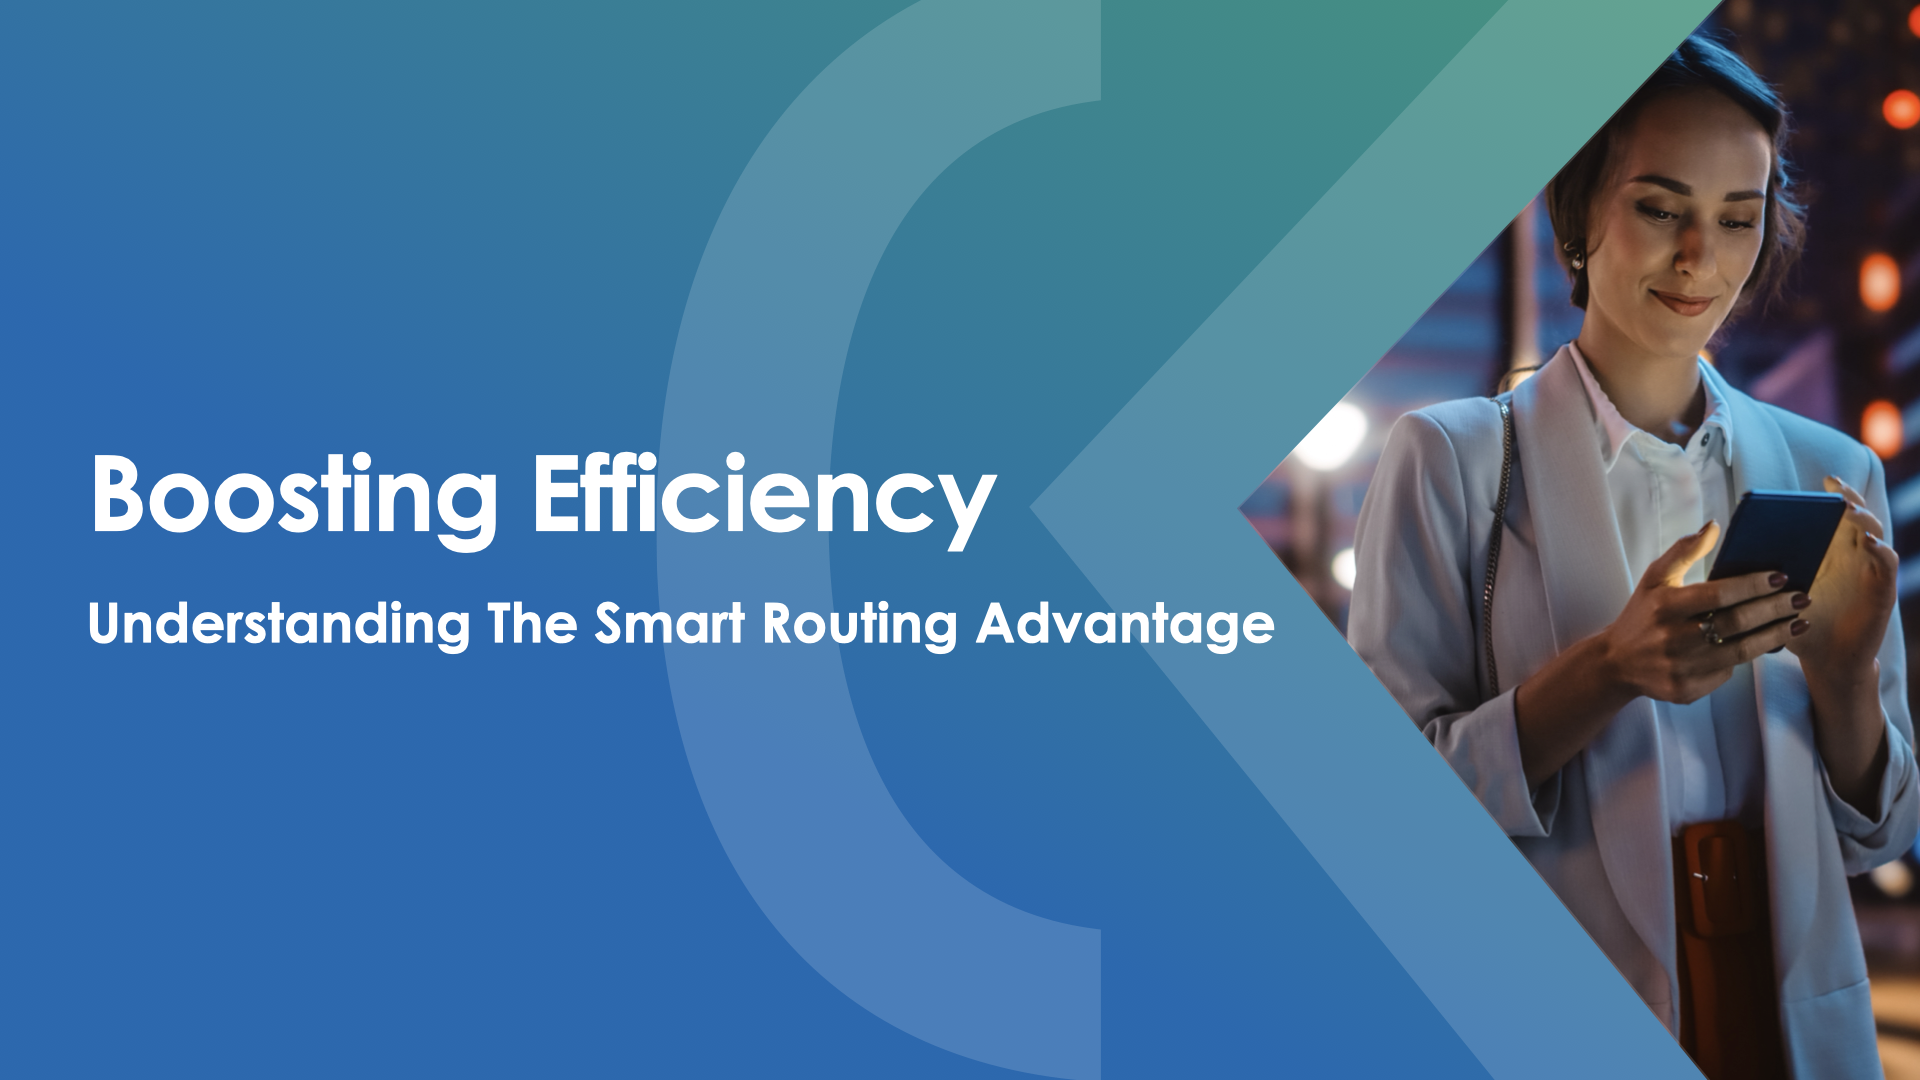 Boosting Efficiency: Understanding The Smart Routing Advantage